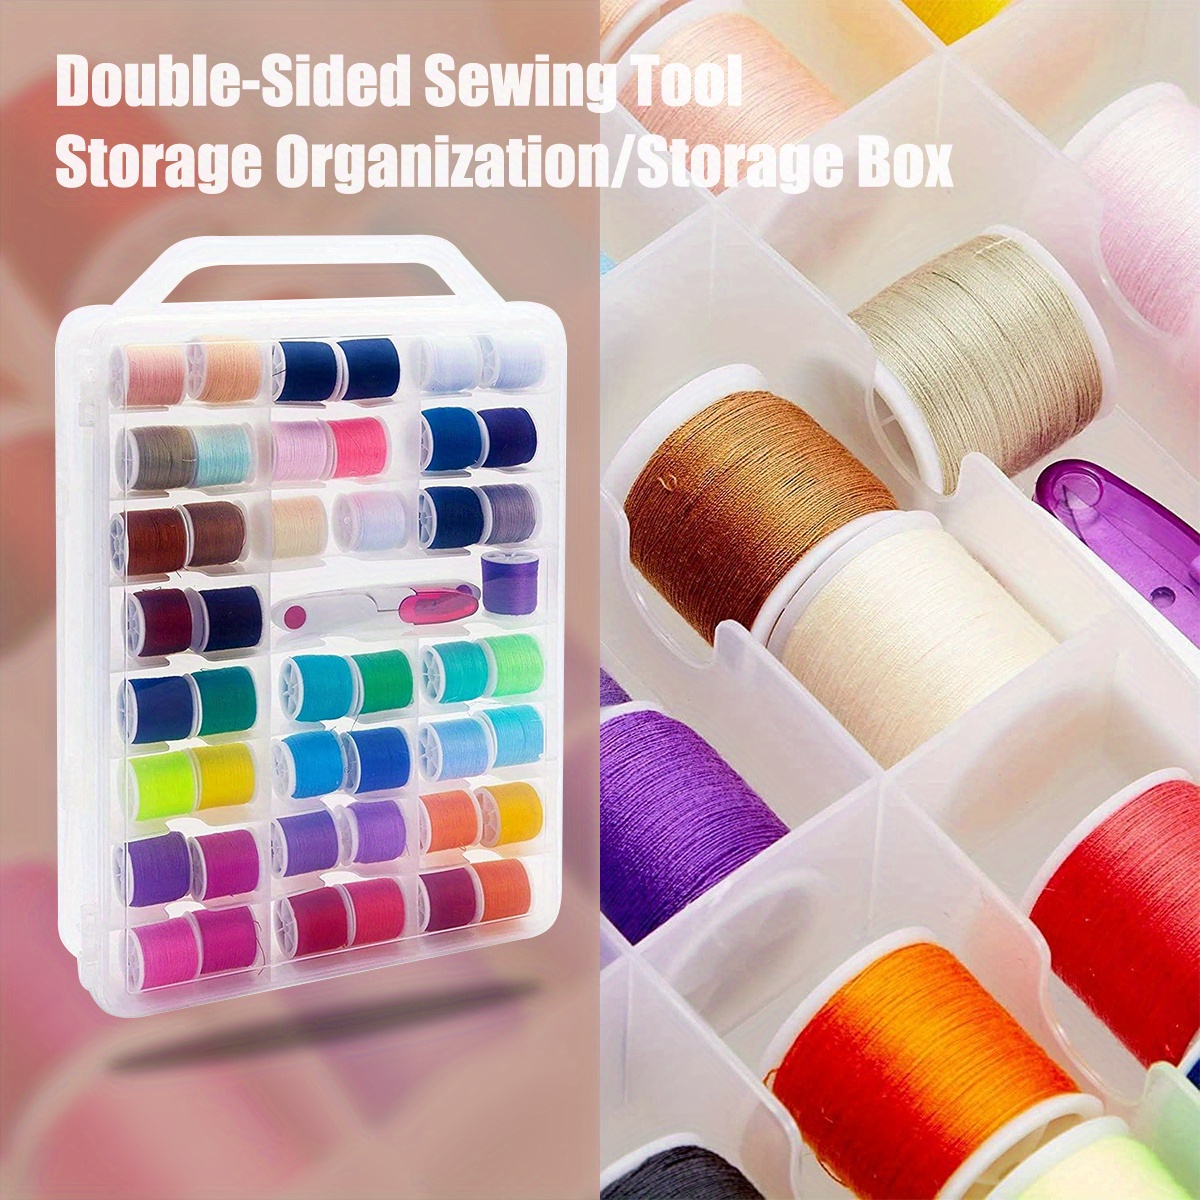 Adjustable 36 Grids Storage Box For Embroidery Floss Bobbins Cross Stitch  Earring Bead Holder Case Organizer Container Box - Diy Apparel & Needlework  Storage - AliExpress